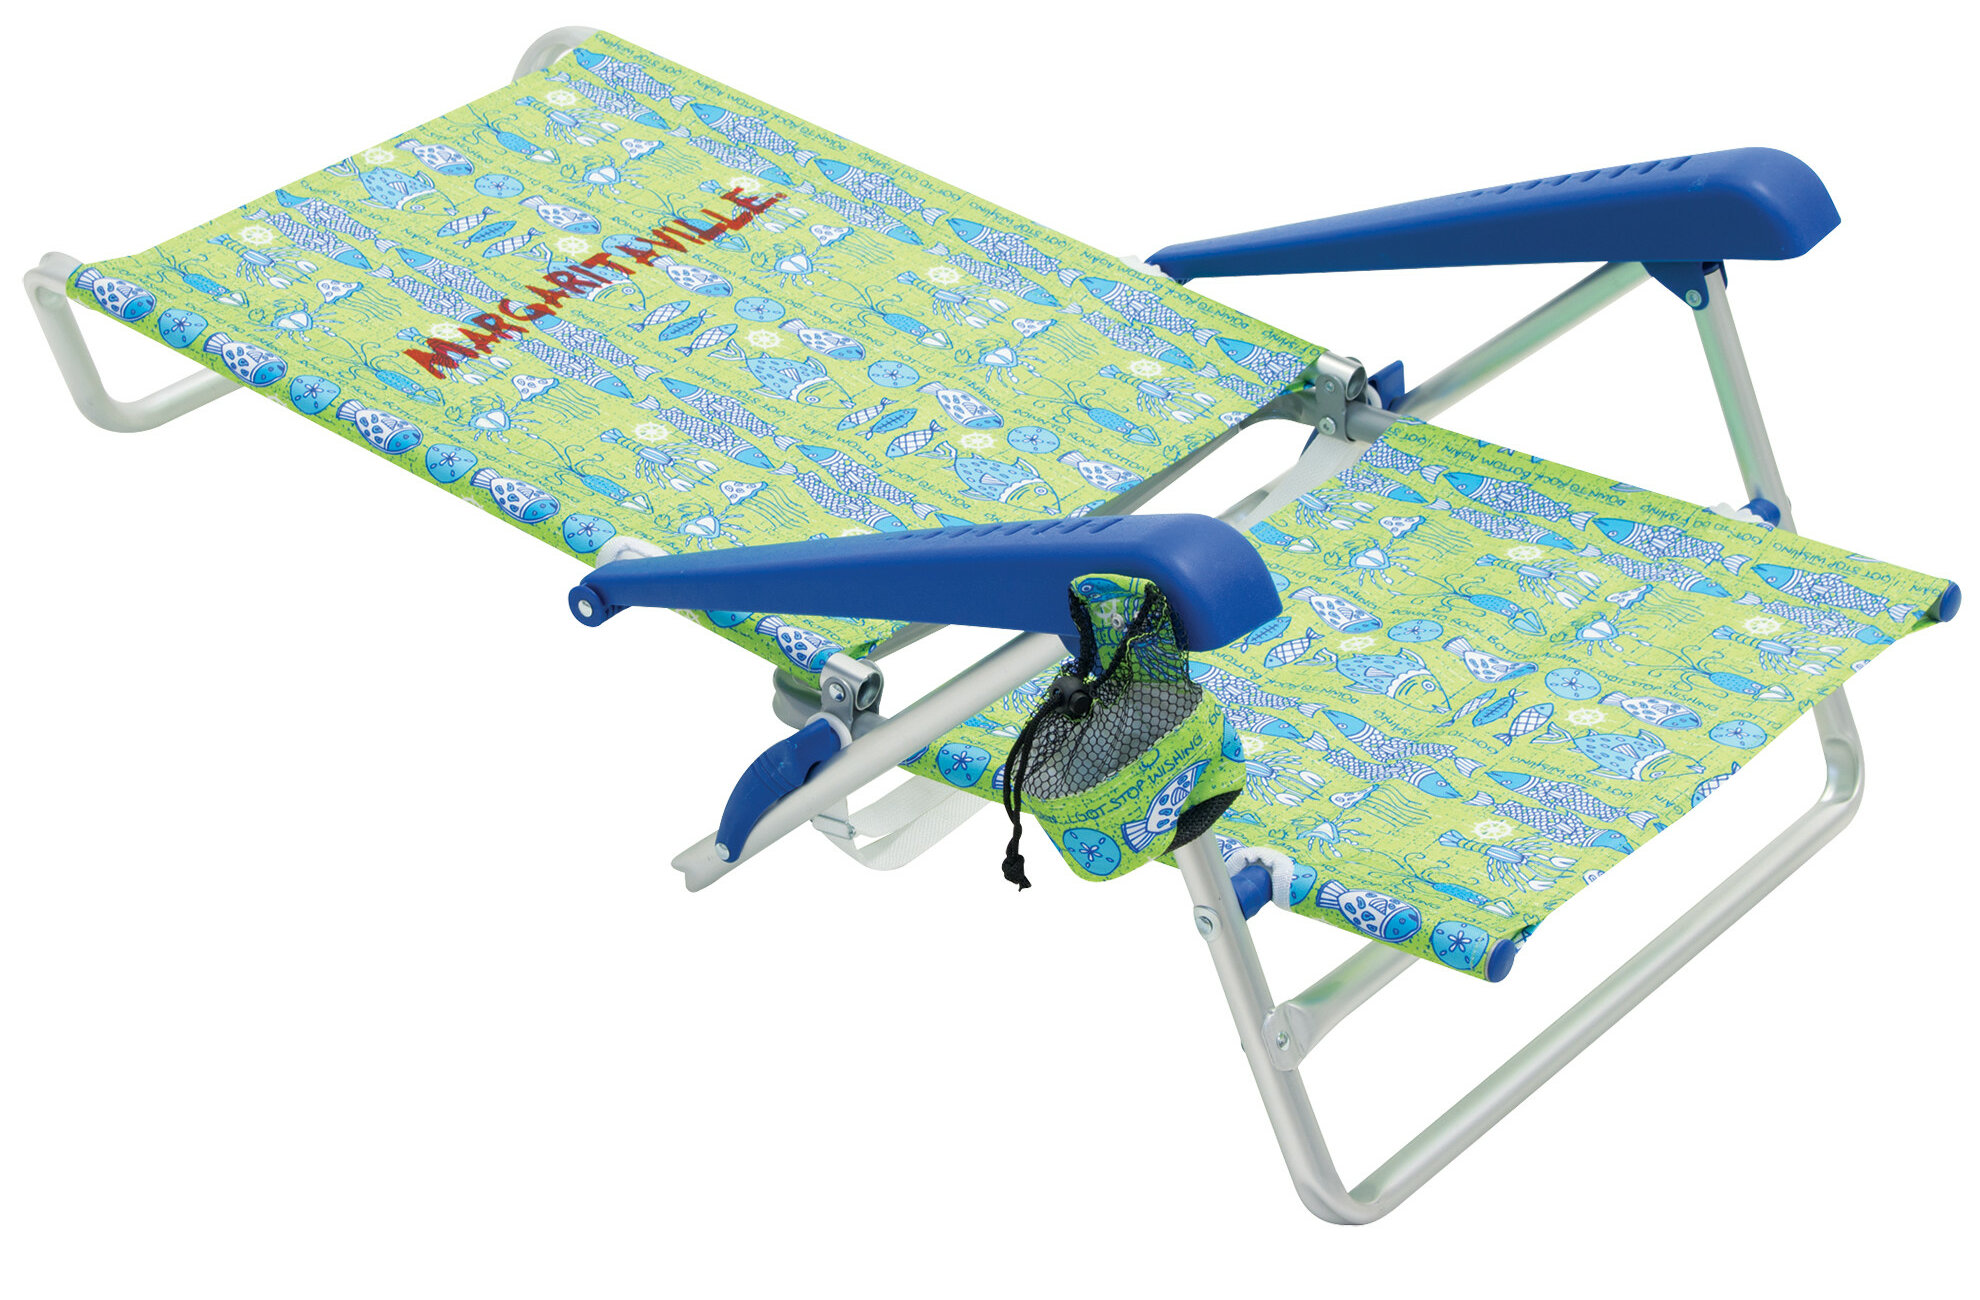 Rio Brands Margaritaville Classic 5 Position Lay Flat Reclining